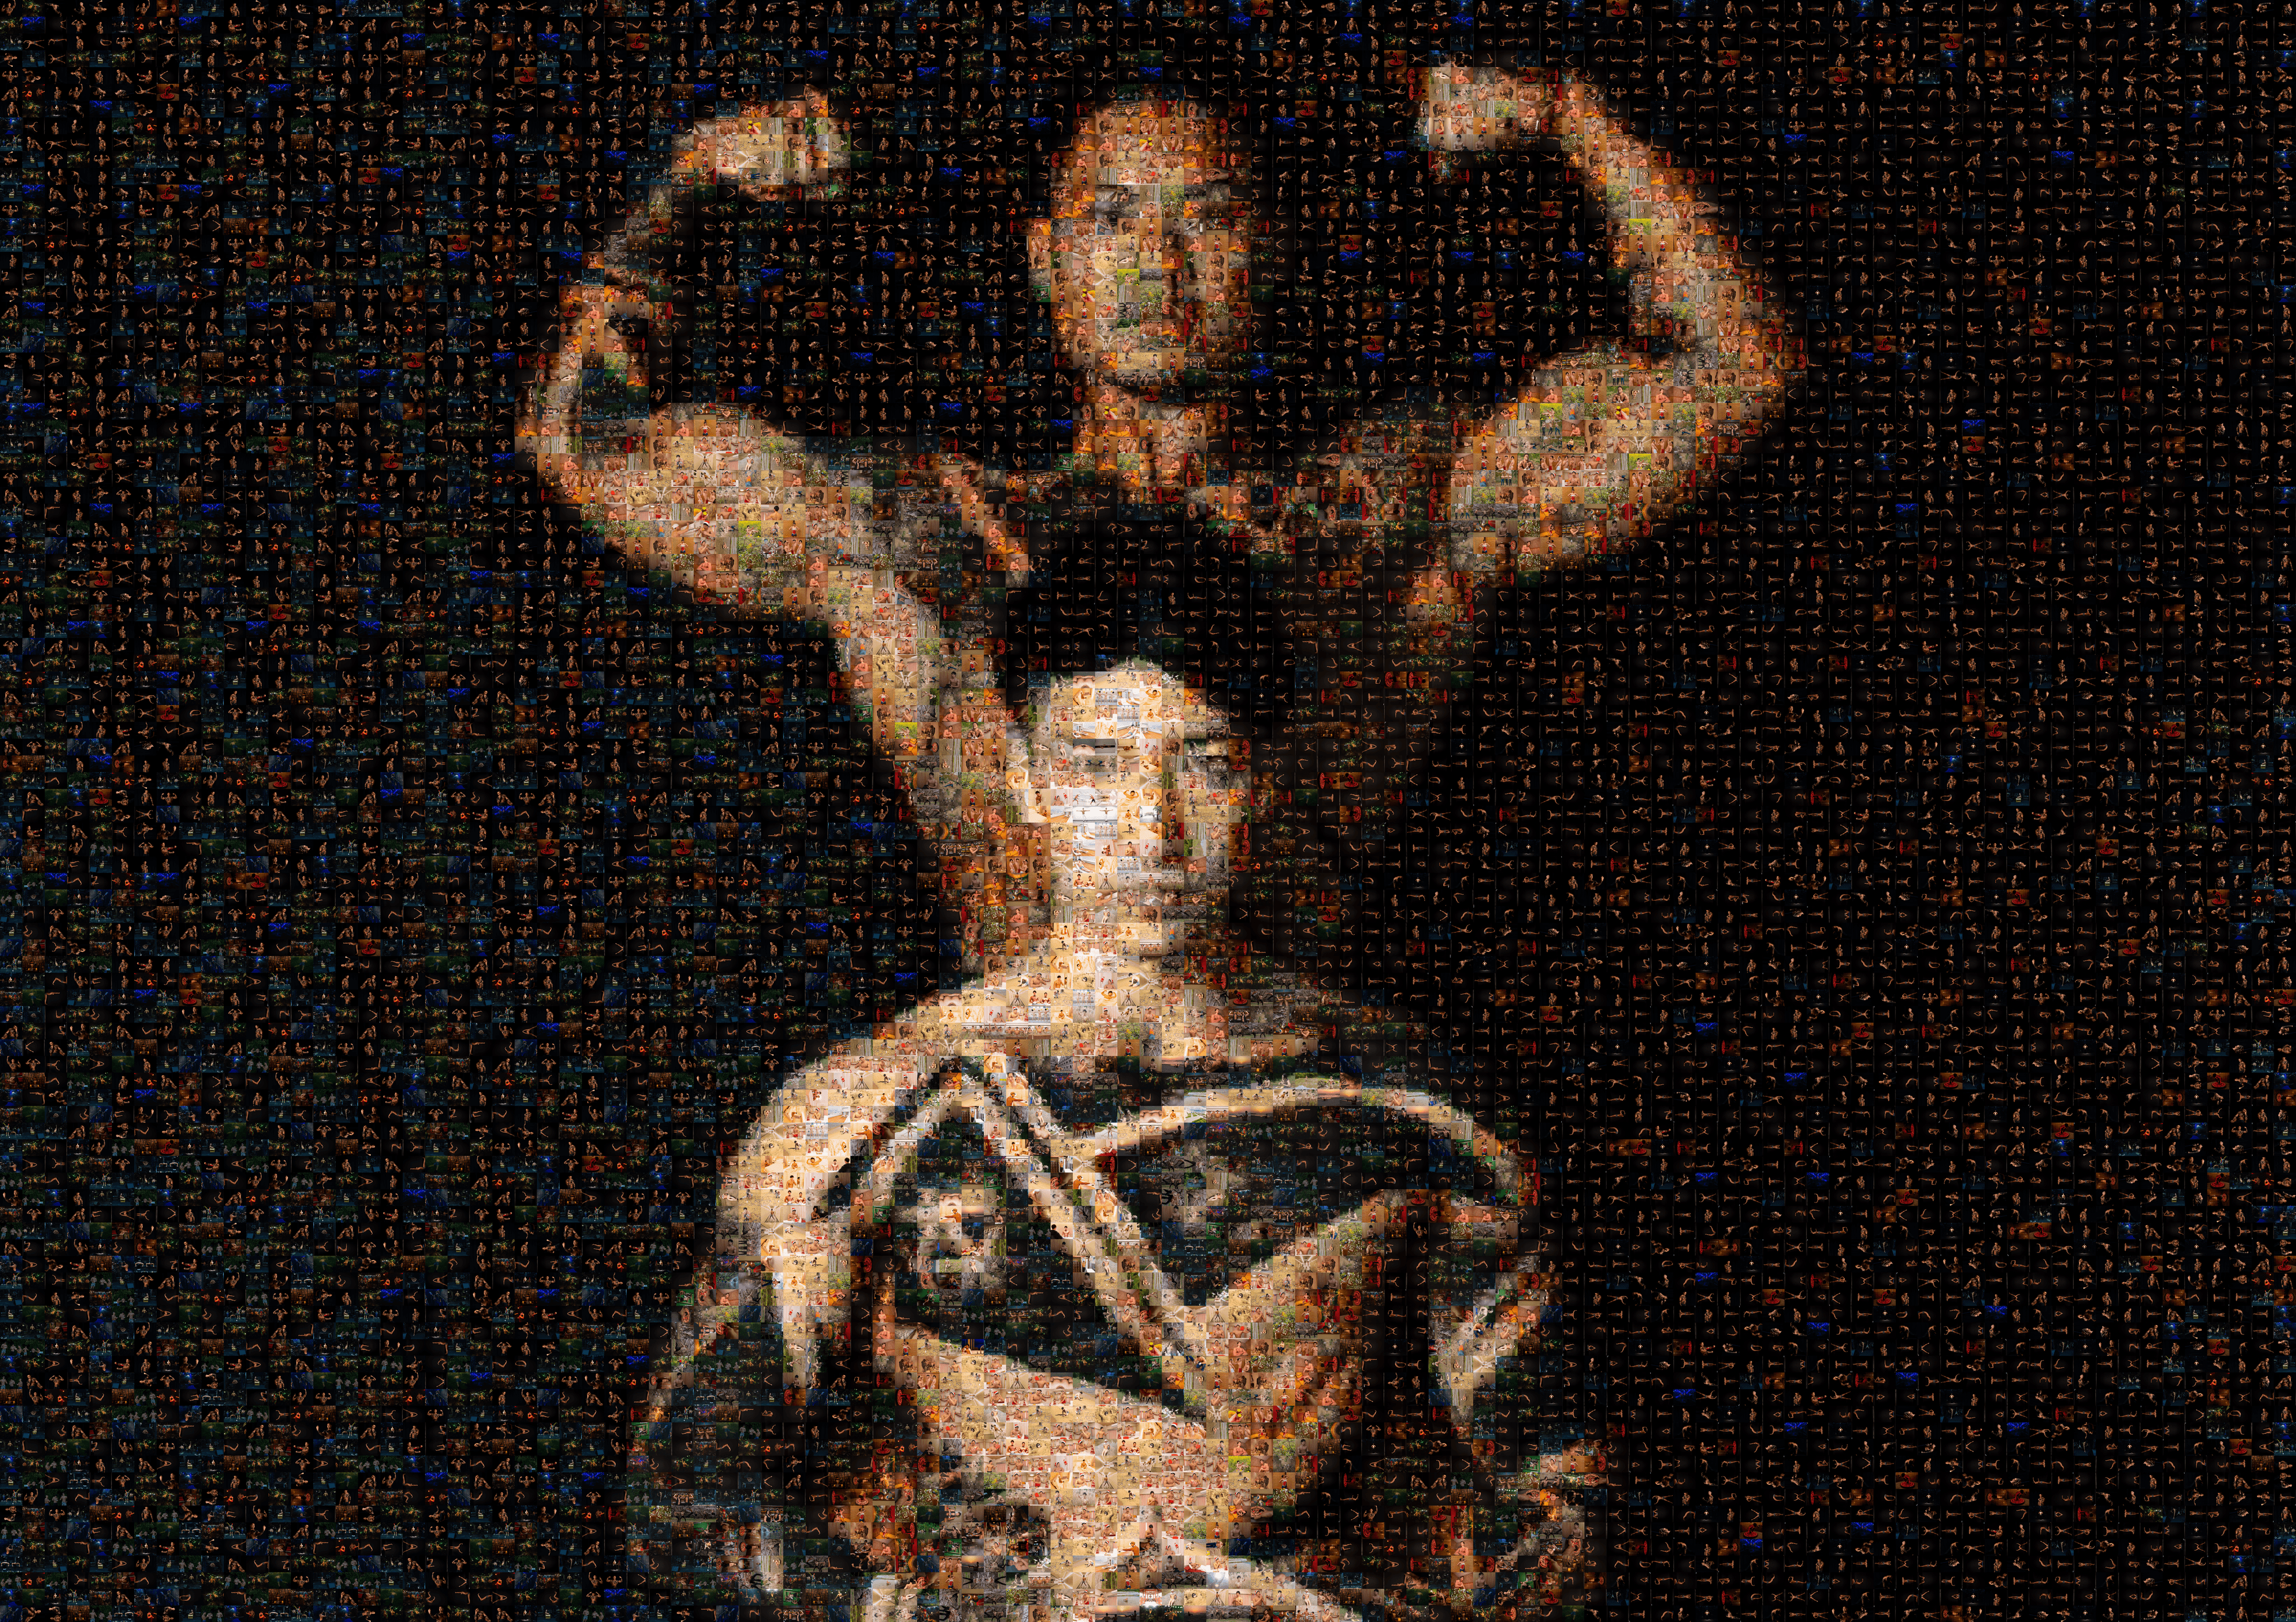 Muscle Mosaic #3 "Art in Muscles"